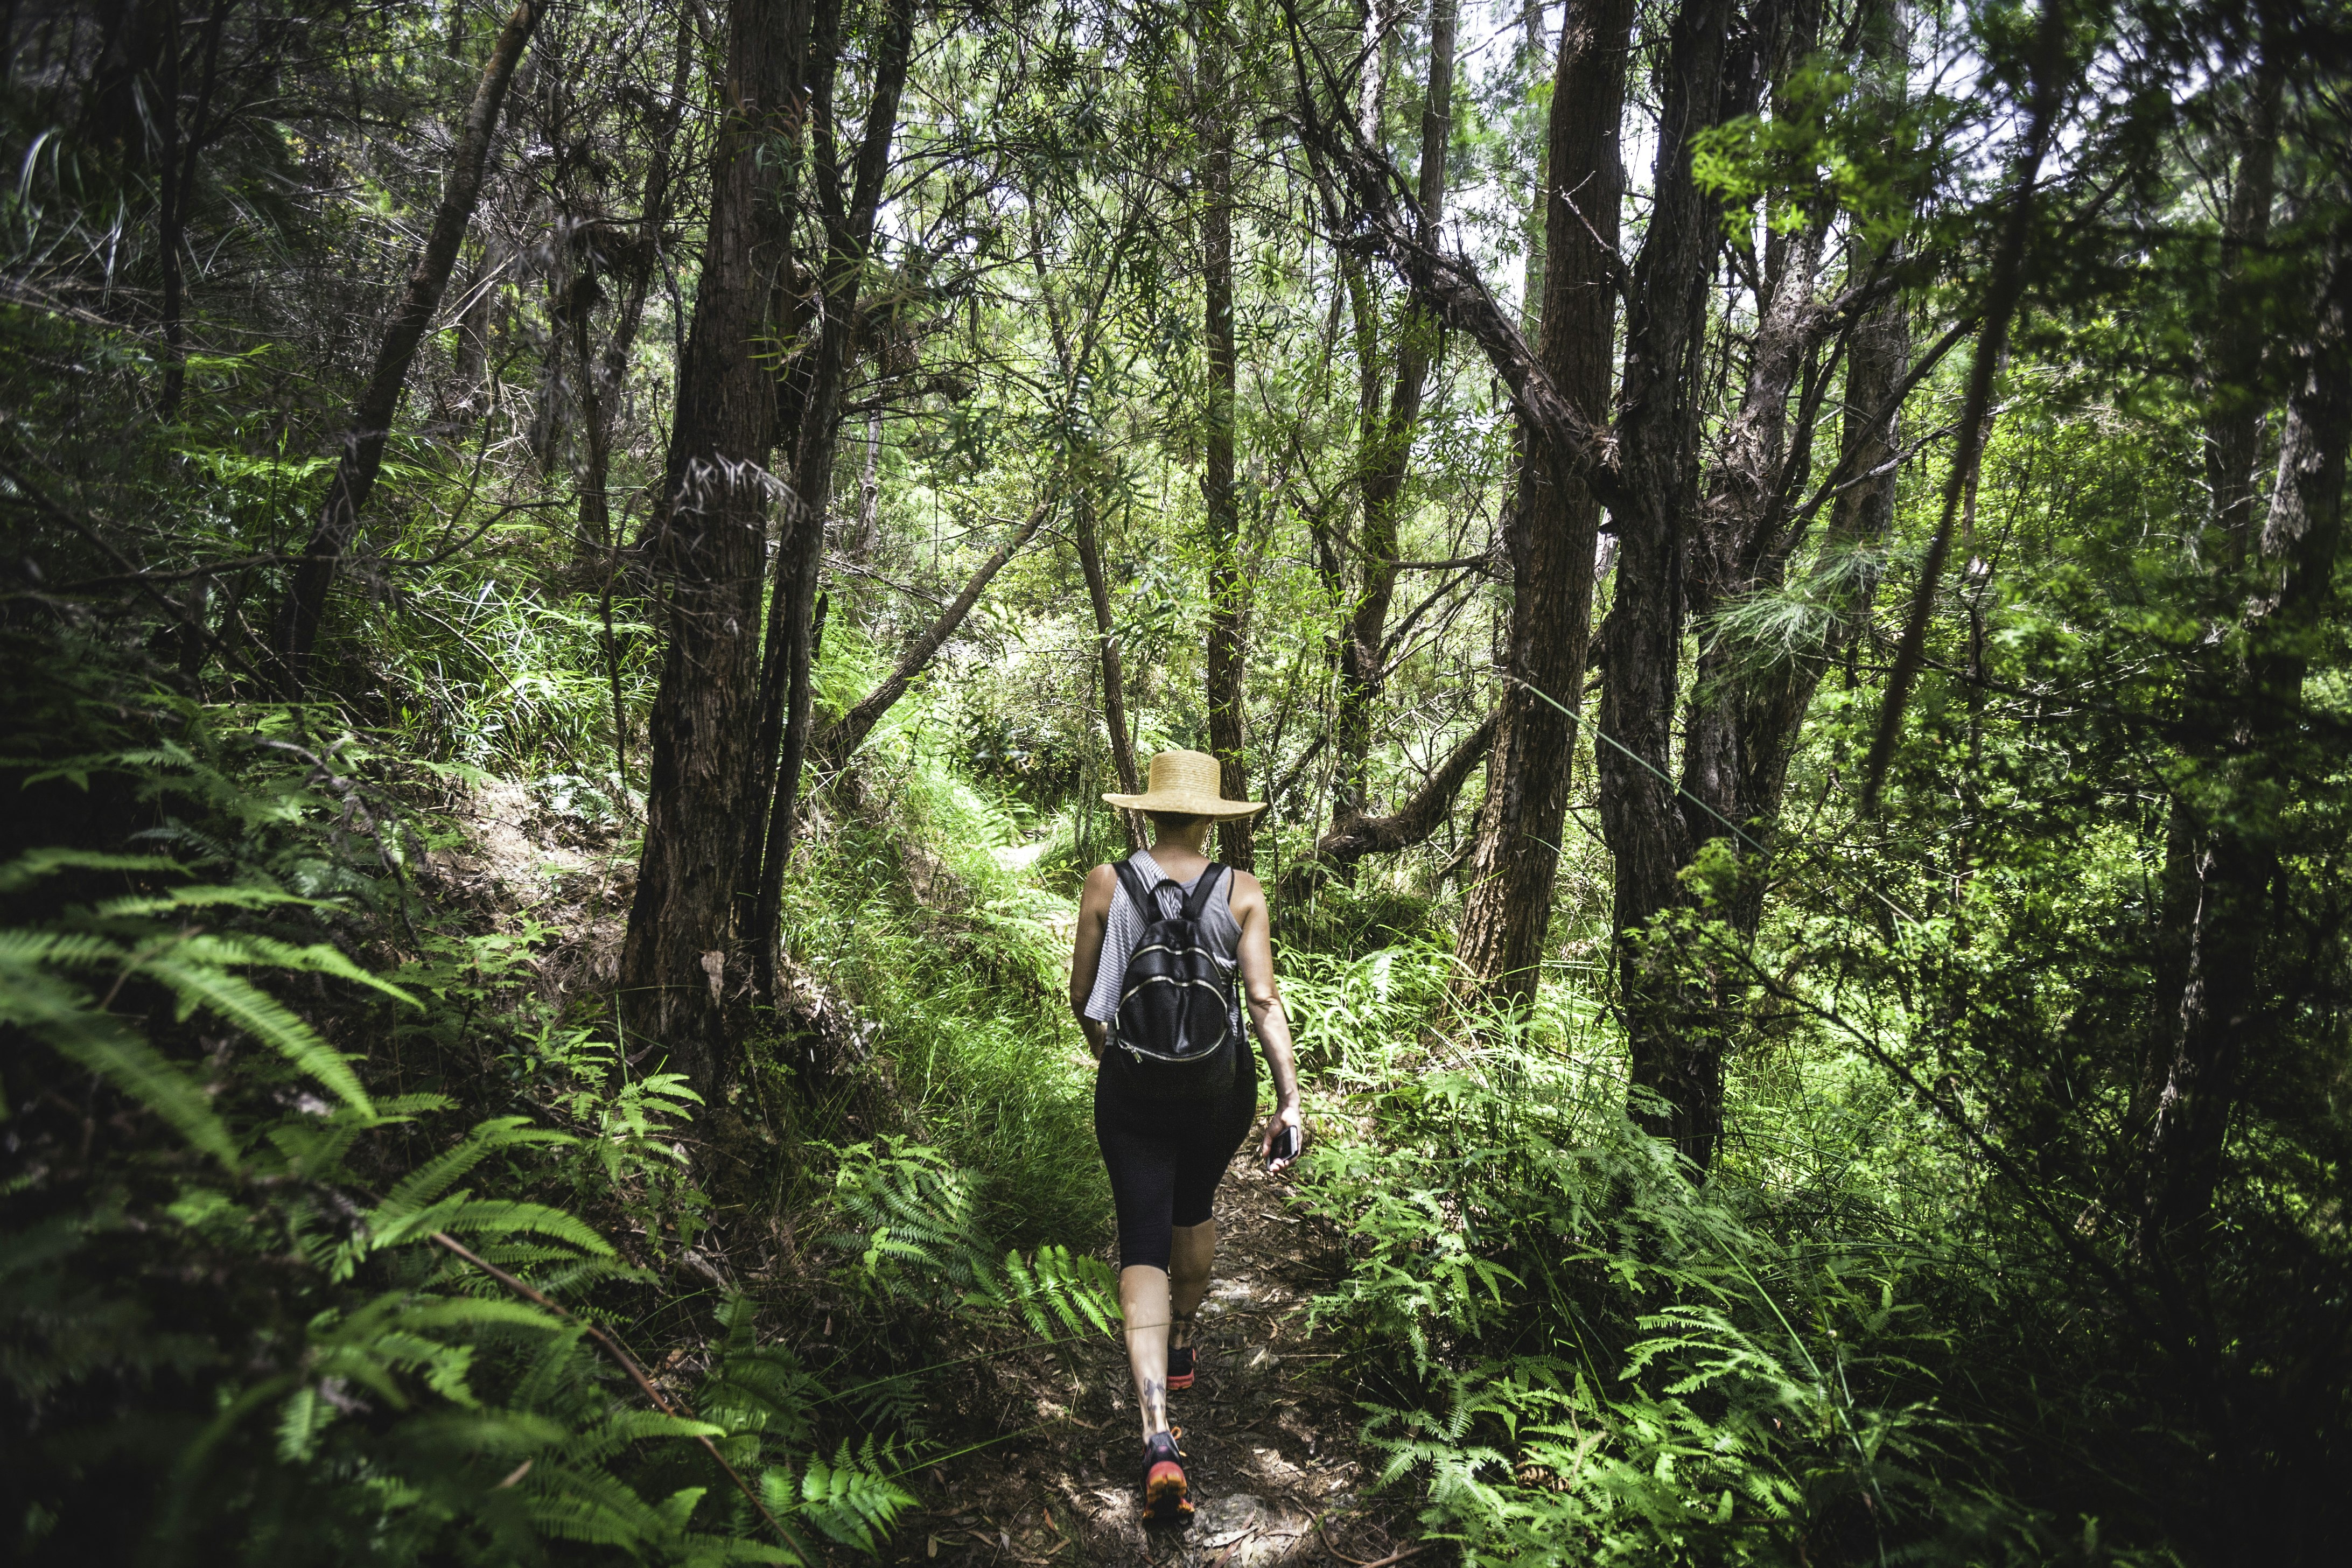 A woman is walking on a narrow trail through the undergrowth in Lamington National Park, Queenland.